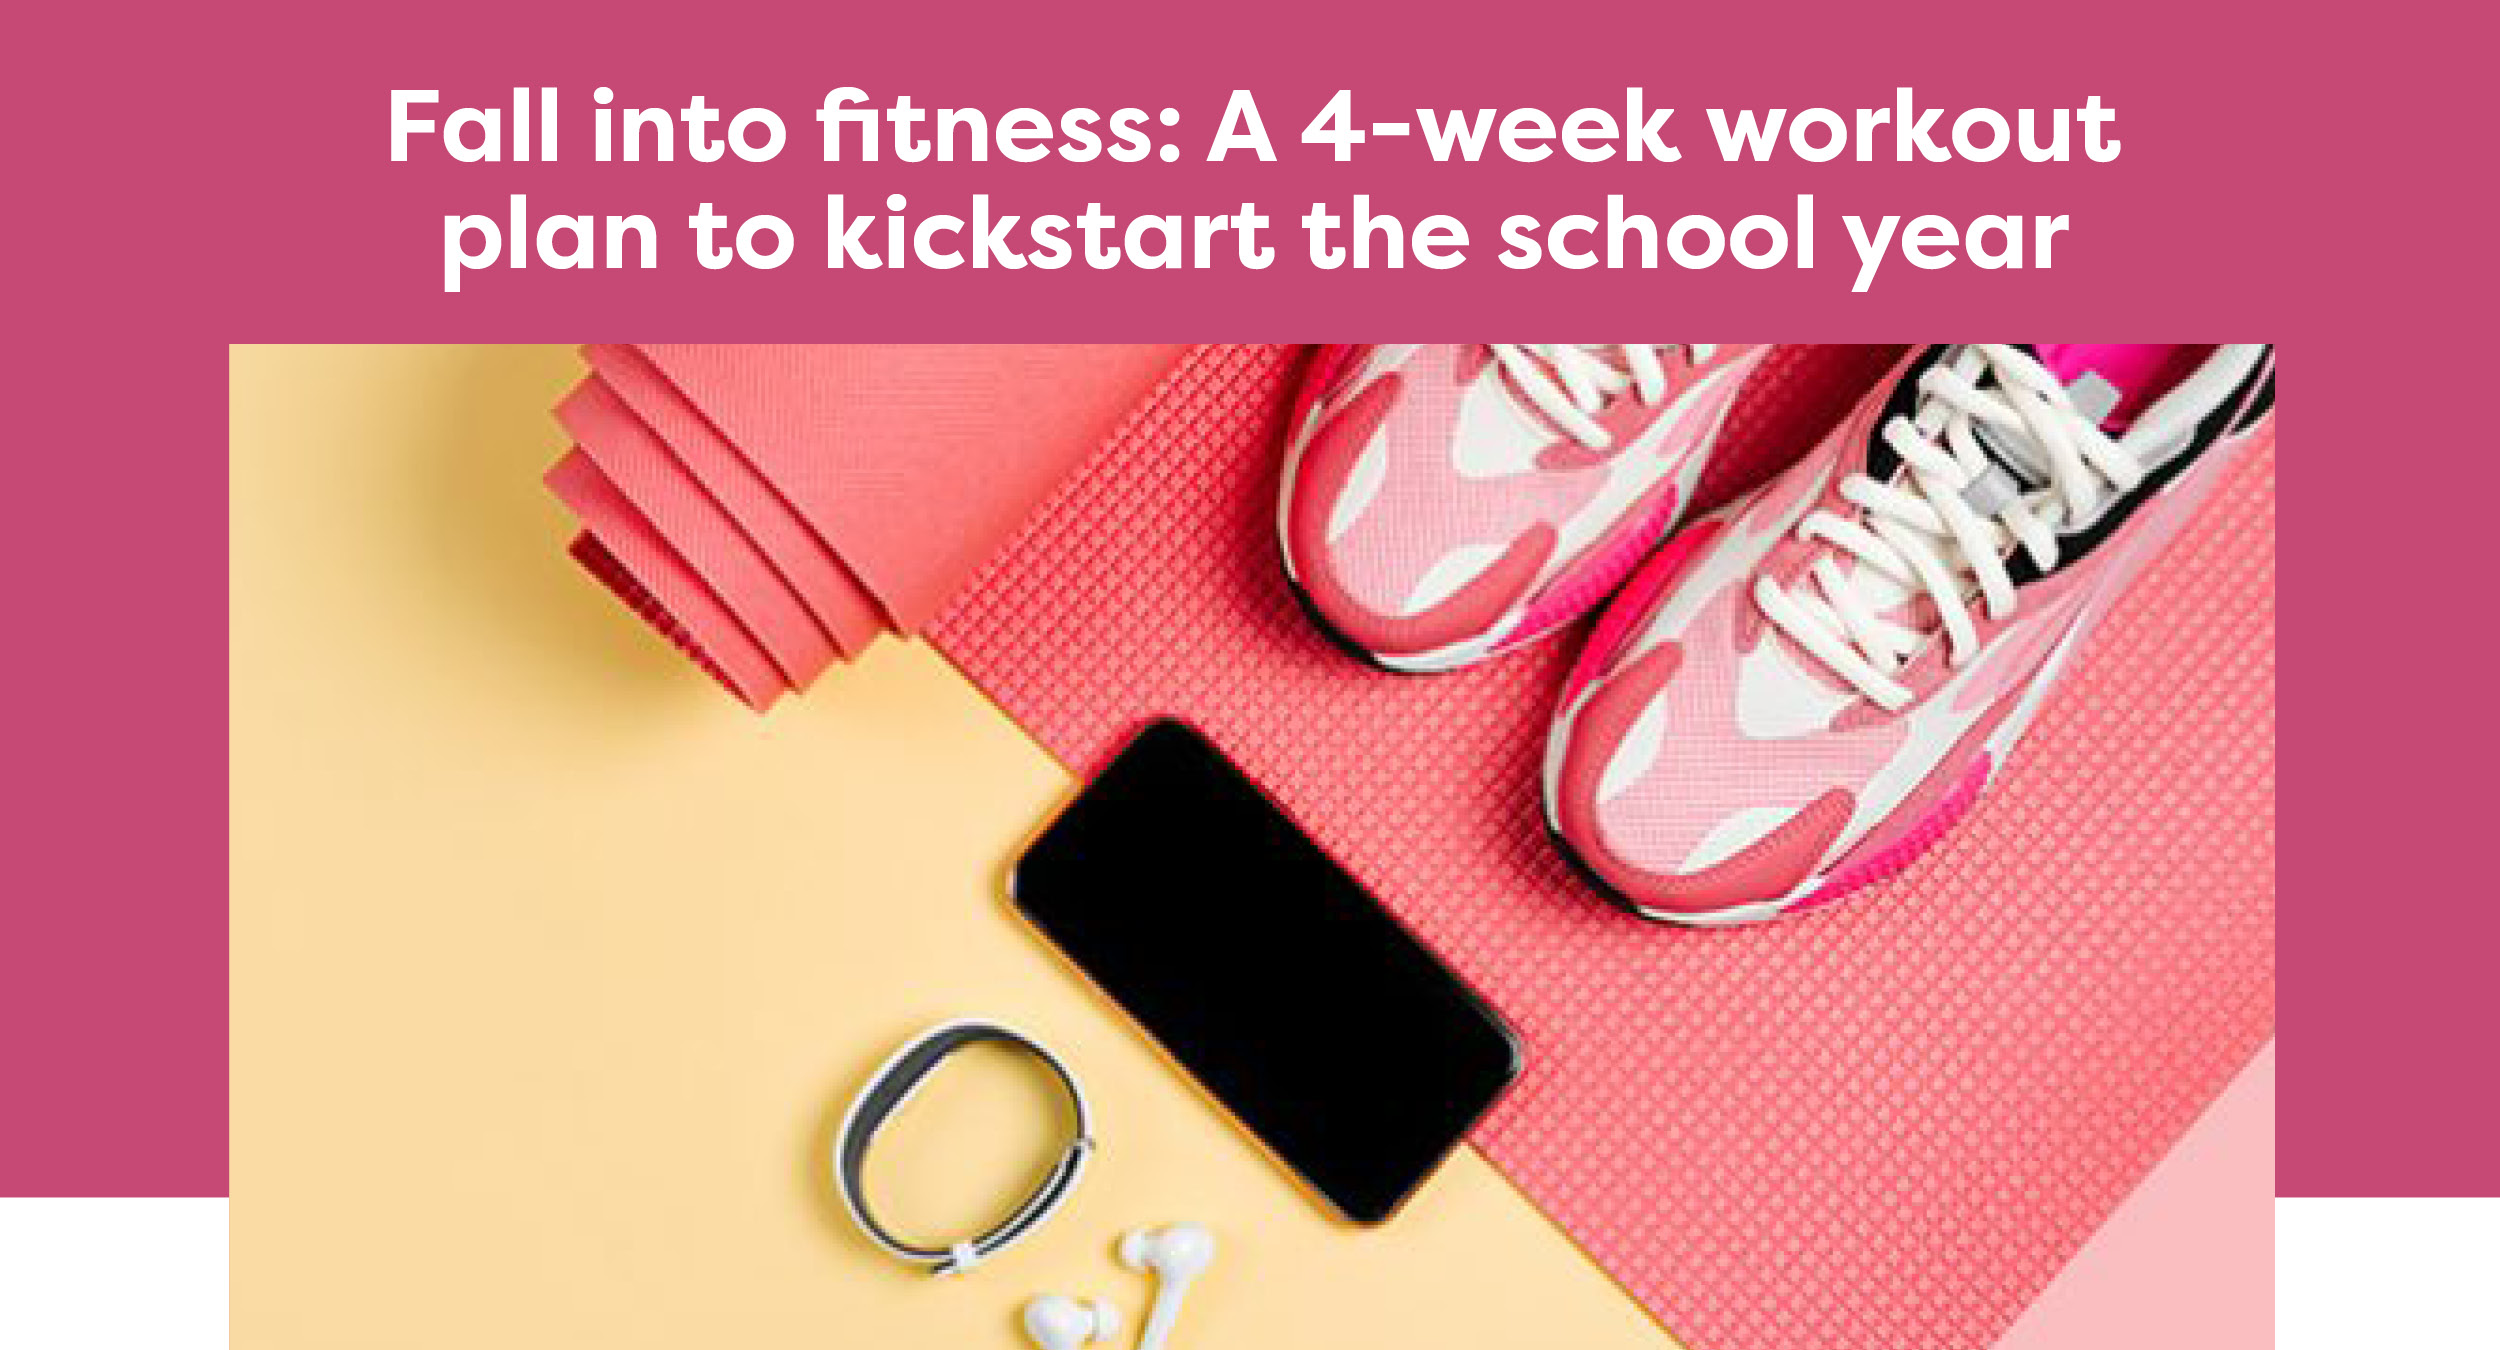 Fall into fitness: A 4-week workout plan to kickstart the school year